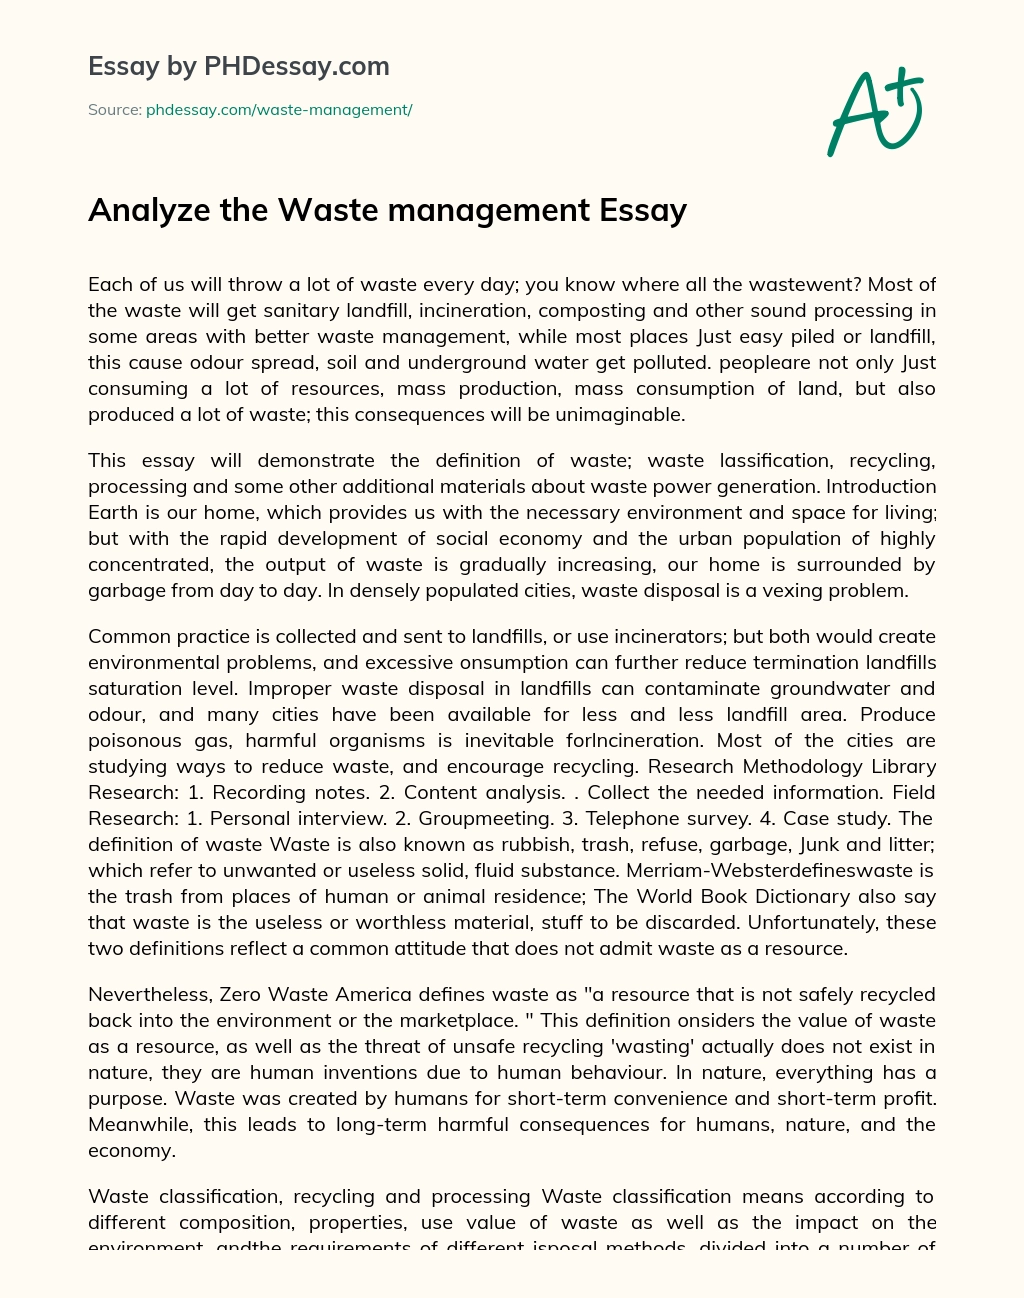 The Consequences of Improper Waste Management: Pollution and Environmental Damage essay